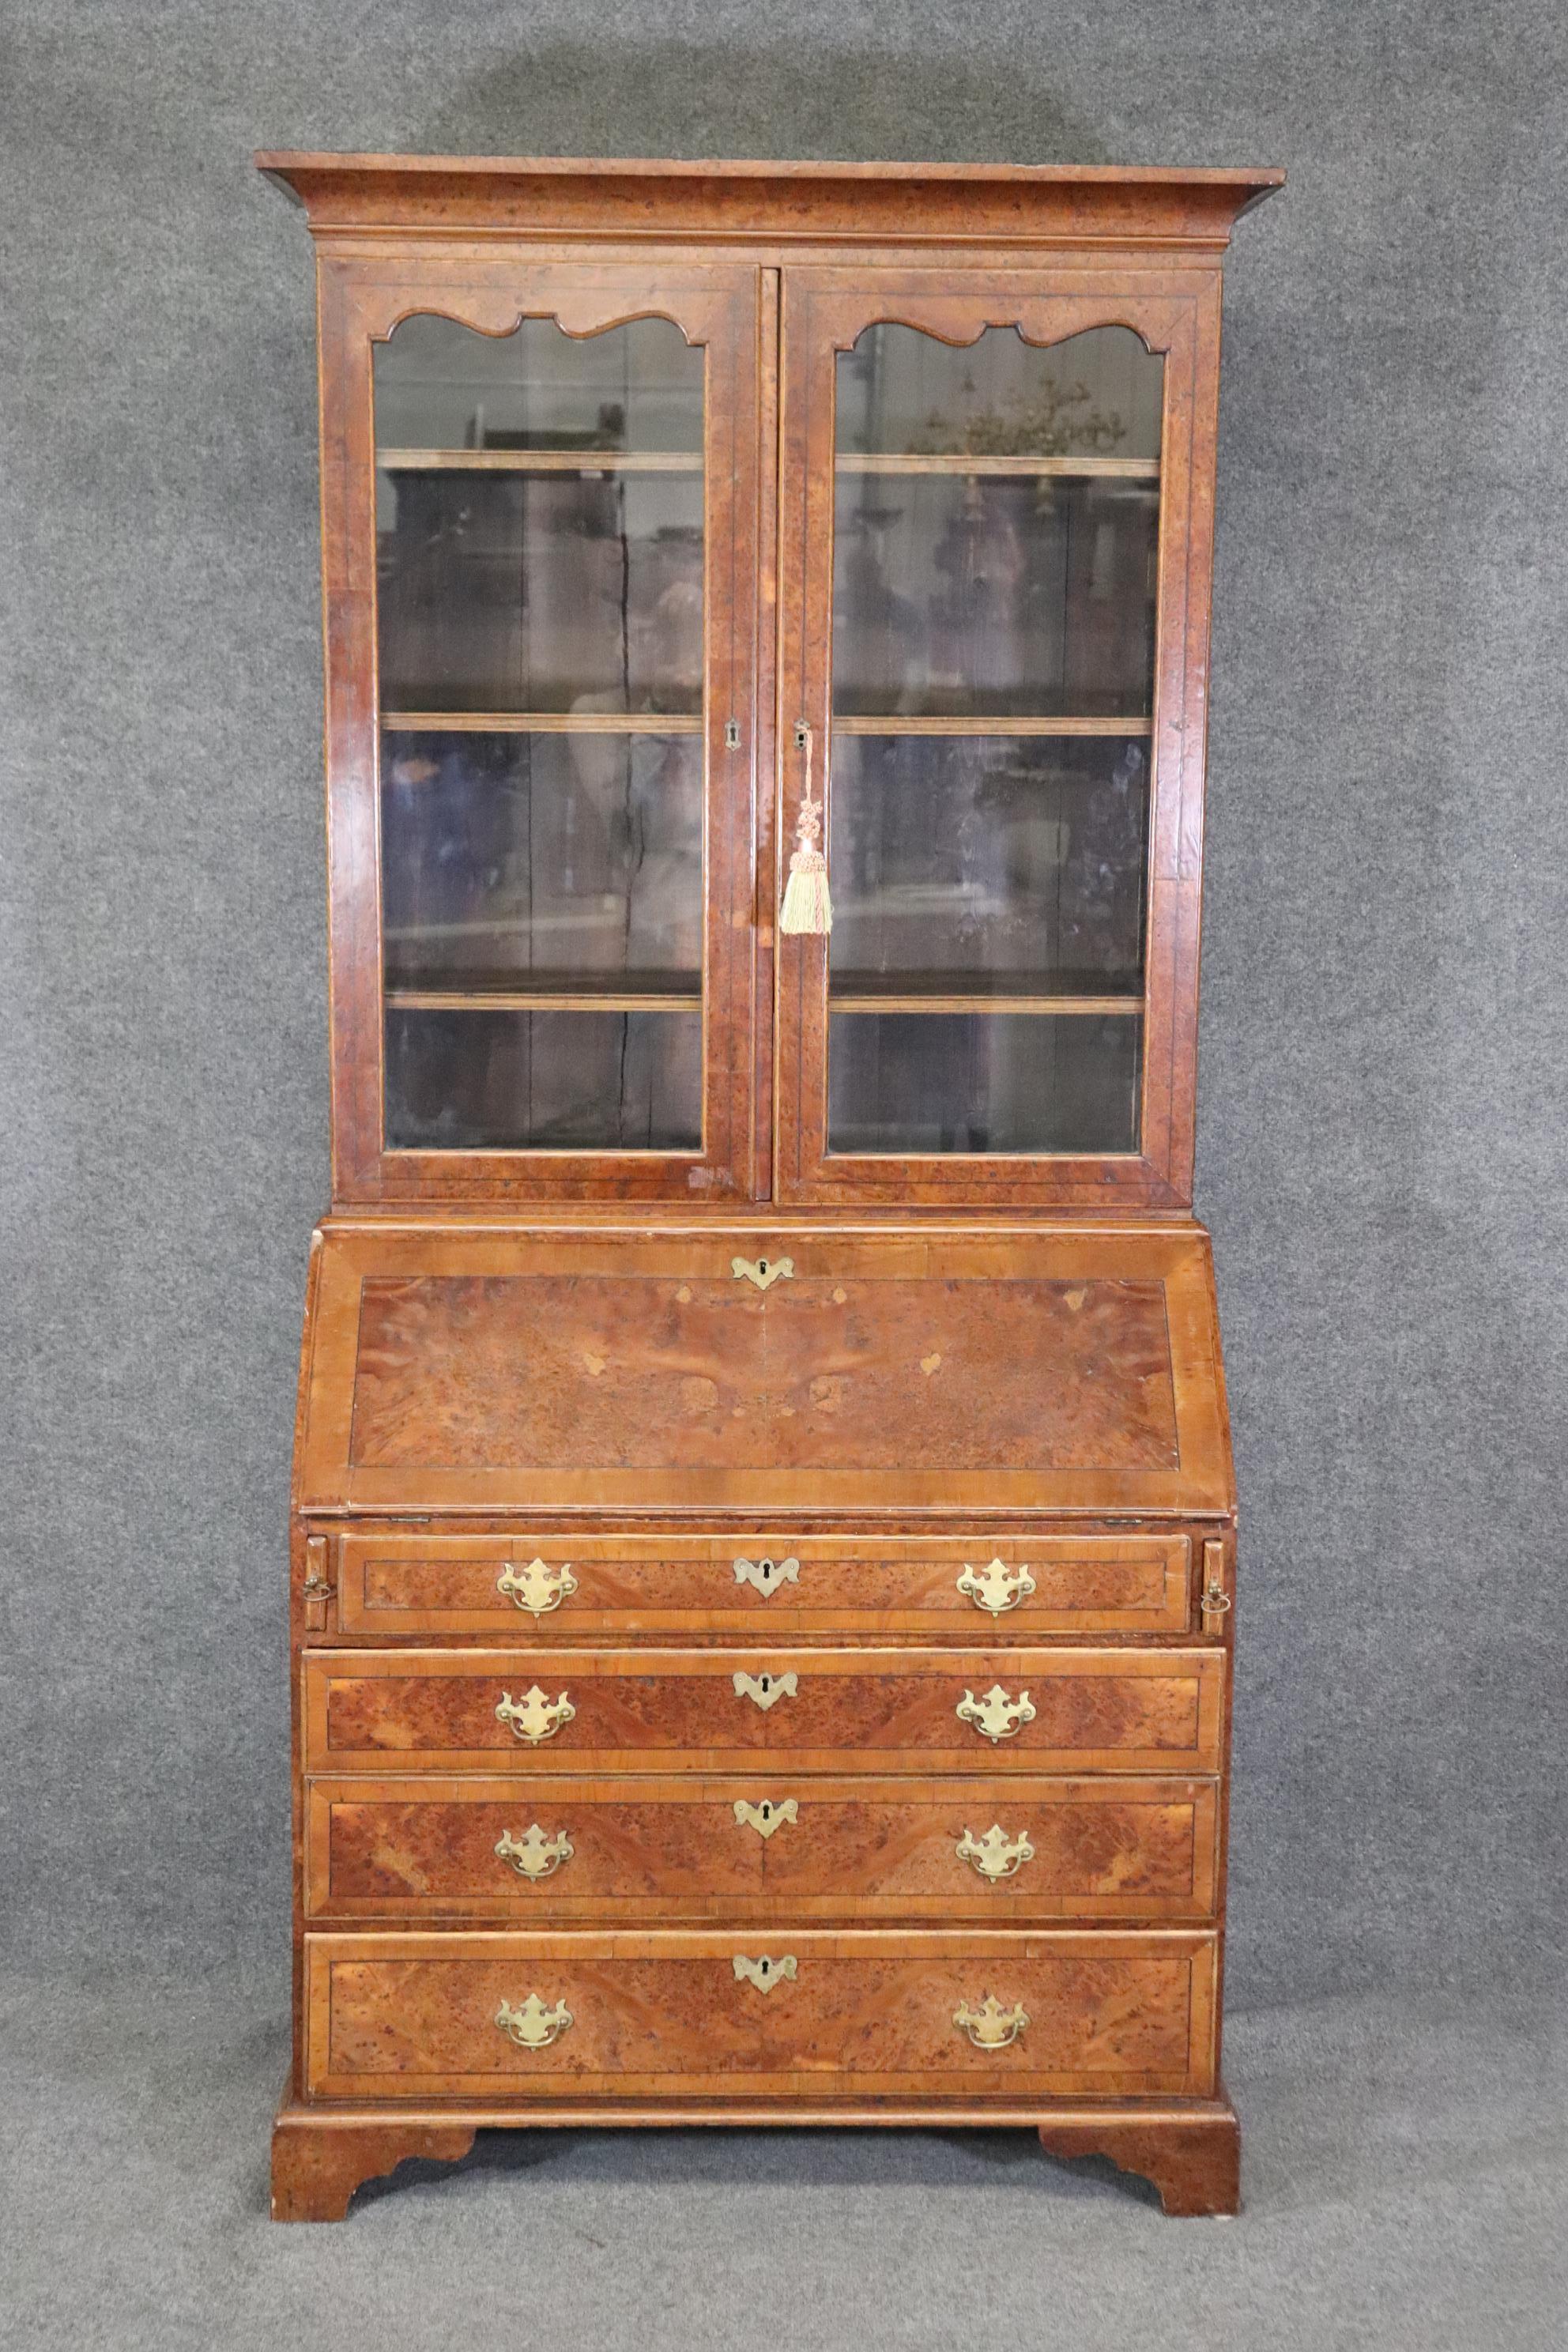 This is a spectacular bruled walnut and yew wood two piece secretary desk from the late 1780-90s era. The piece is in very good antique condition and has been fitted with a fantastic gold tooled distressed leather writing surface and a fantastic